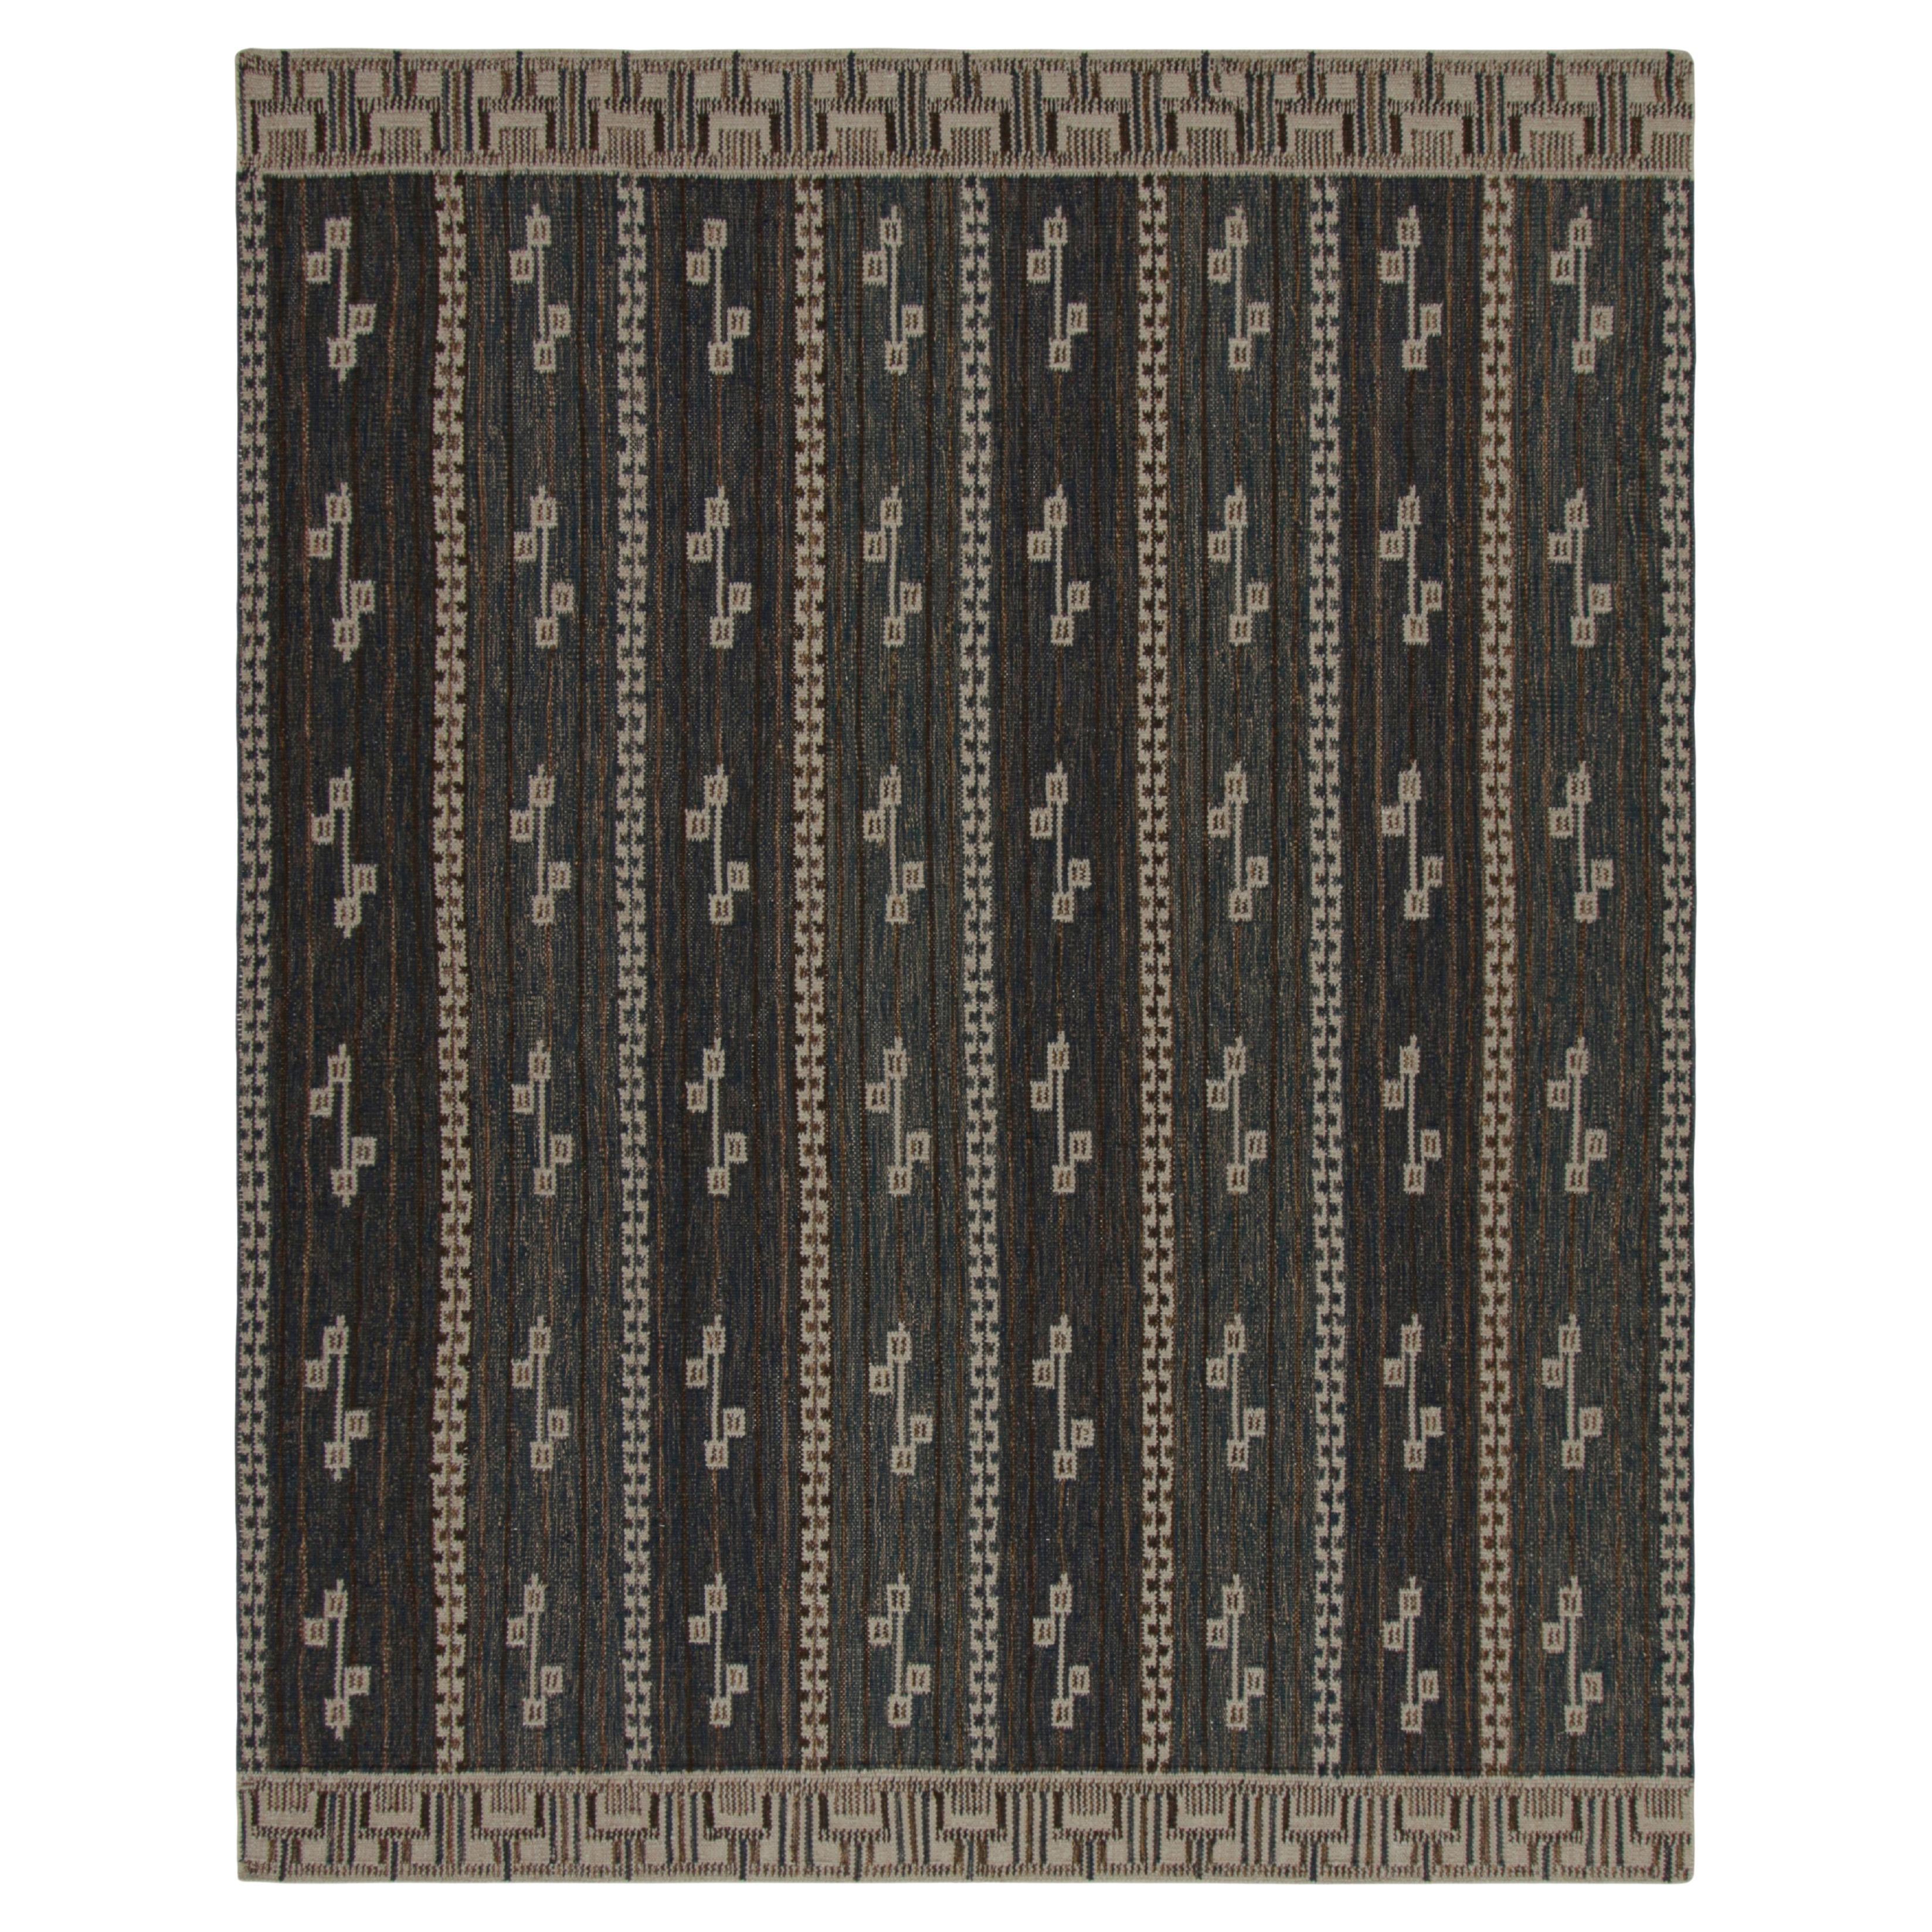 Rug & Kilim’s Scandinavian Style Rug in Navy Blue with Brown Geometric Patterns